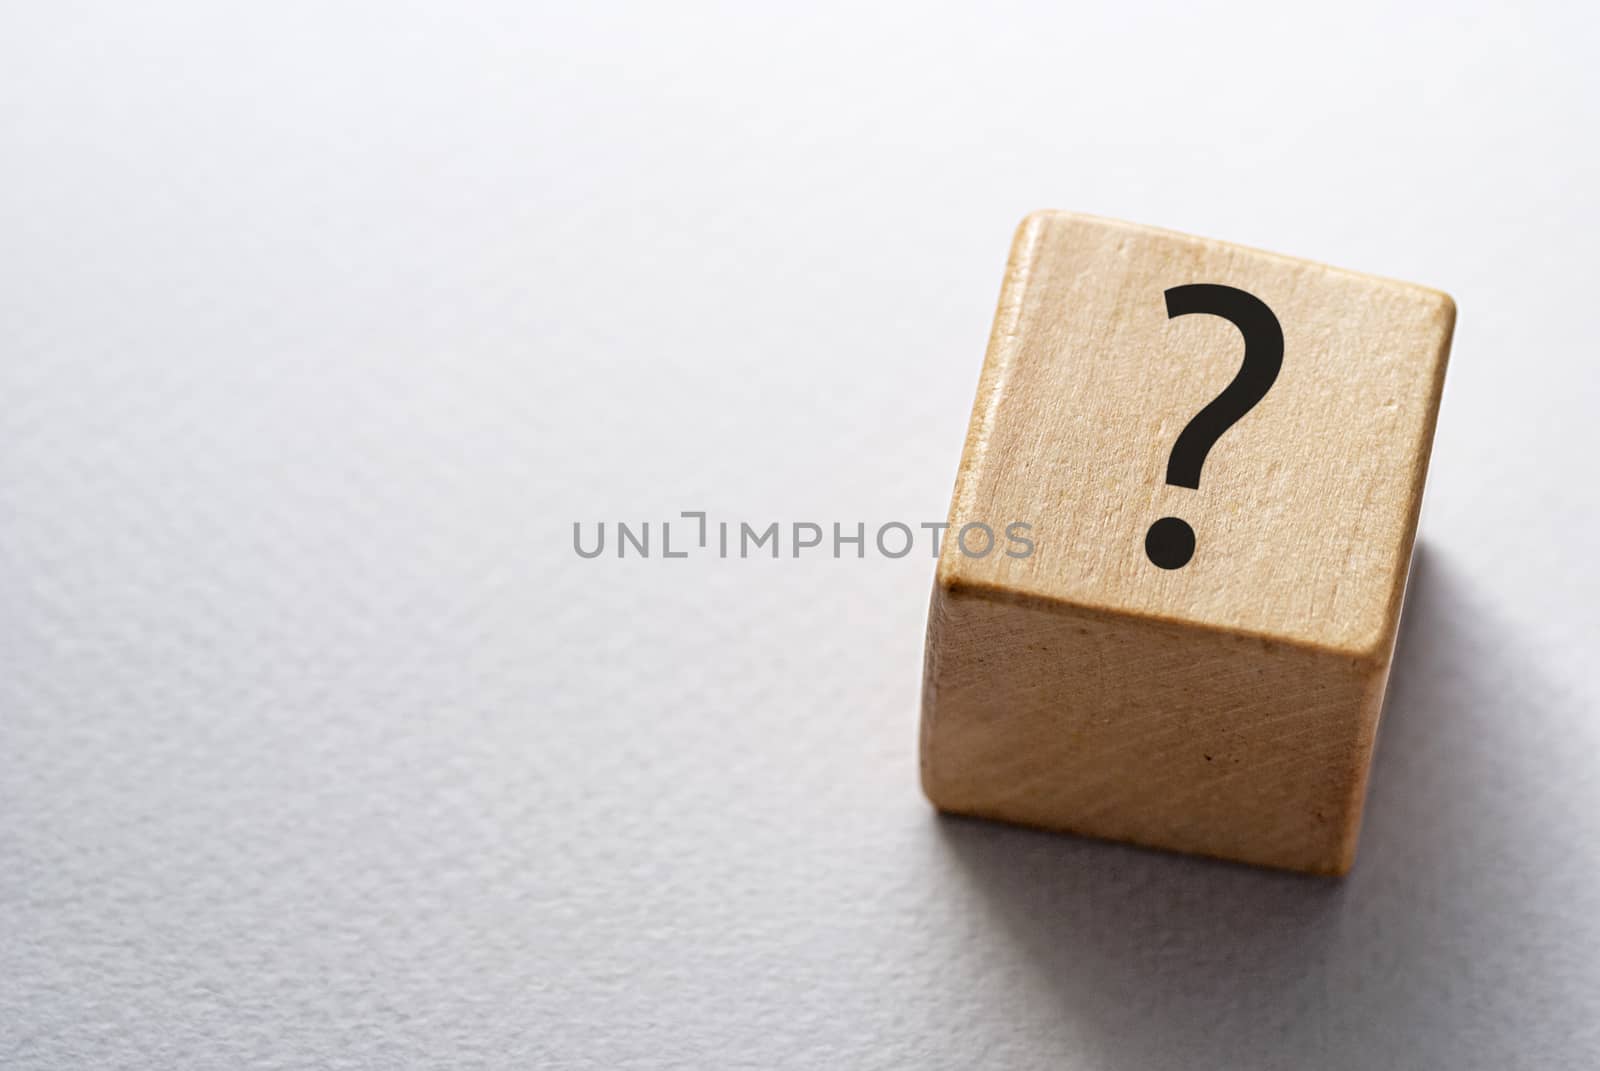 Natural wooden cube or dice with question mark viewed high angle on white with copy space